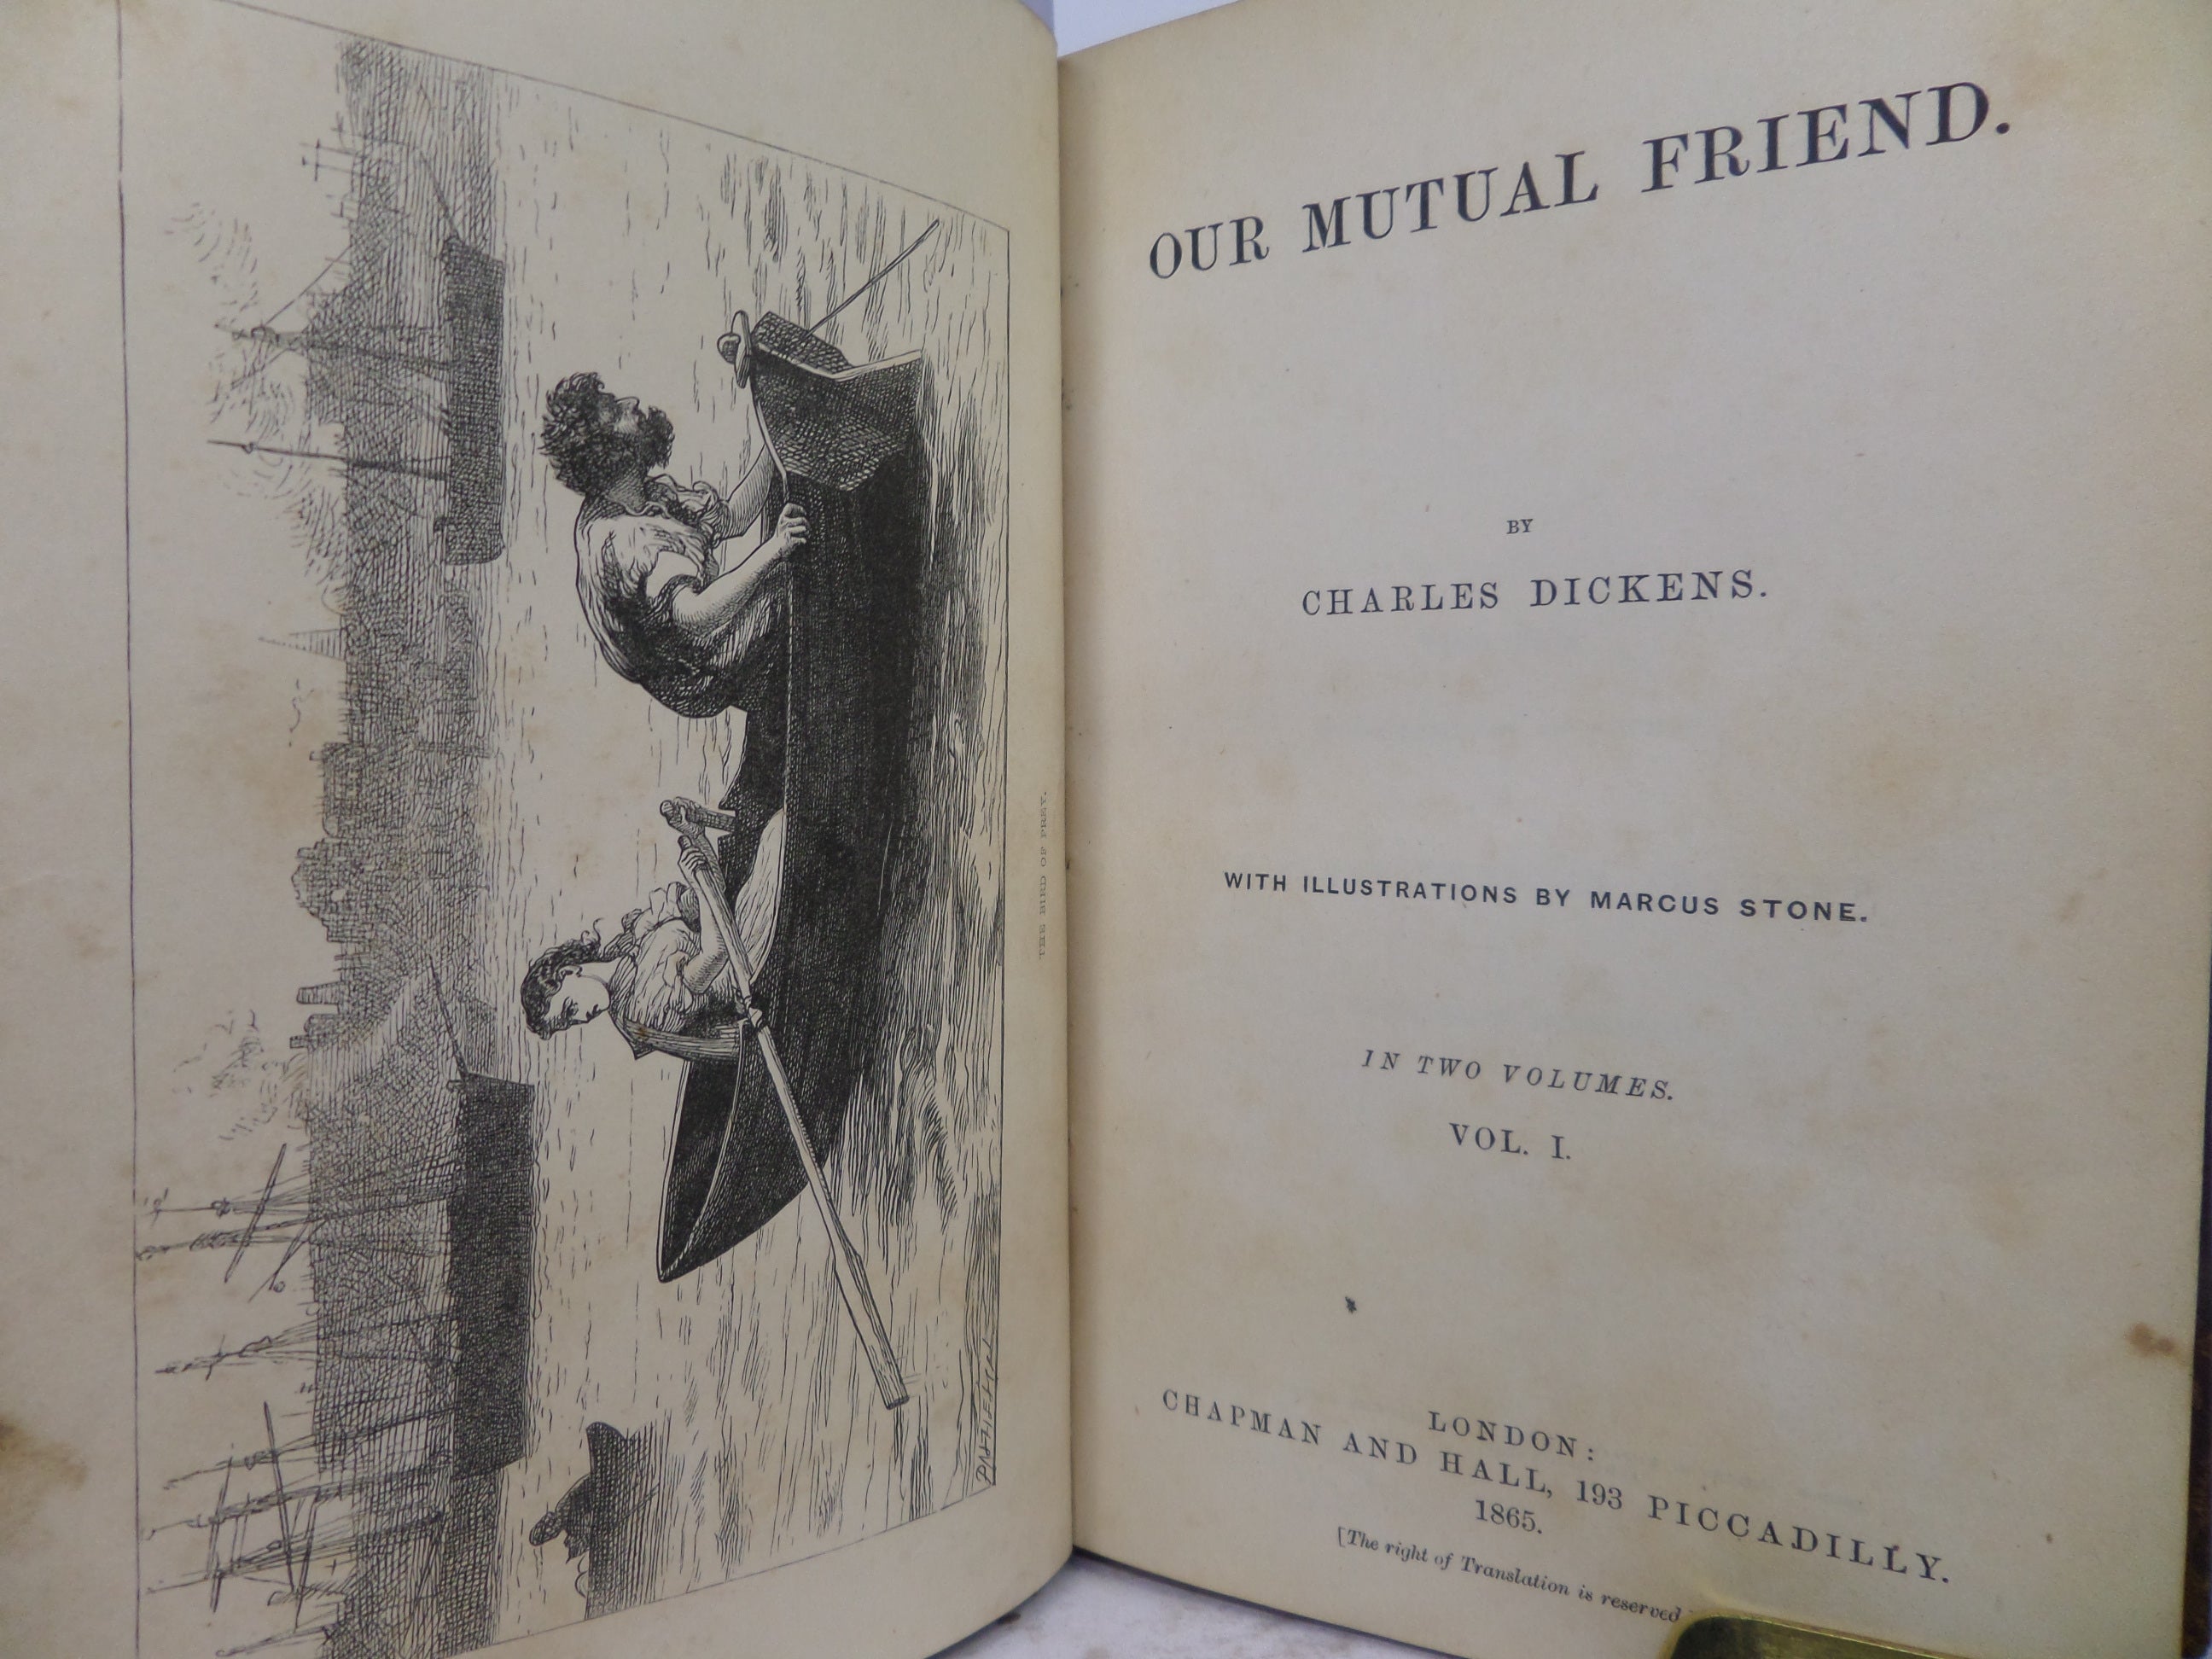 OUR MUTUAL FRIEND BY CHARLES DICKENS 1865 FIRST EDITION, LEATHER BINDING